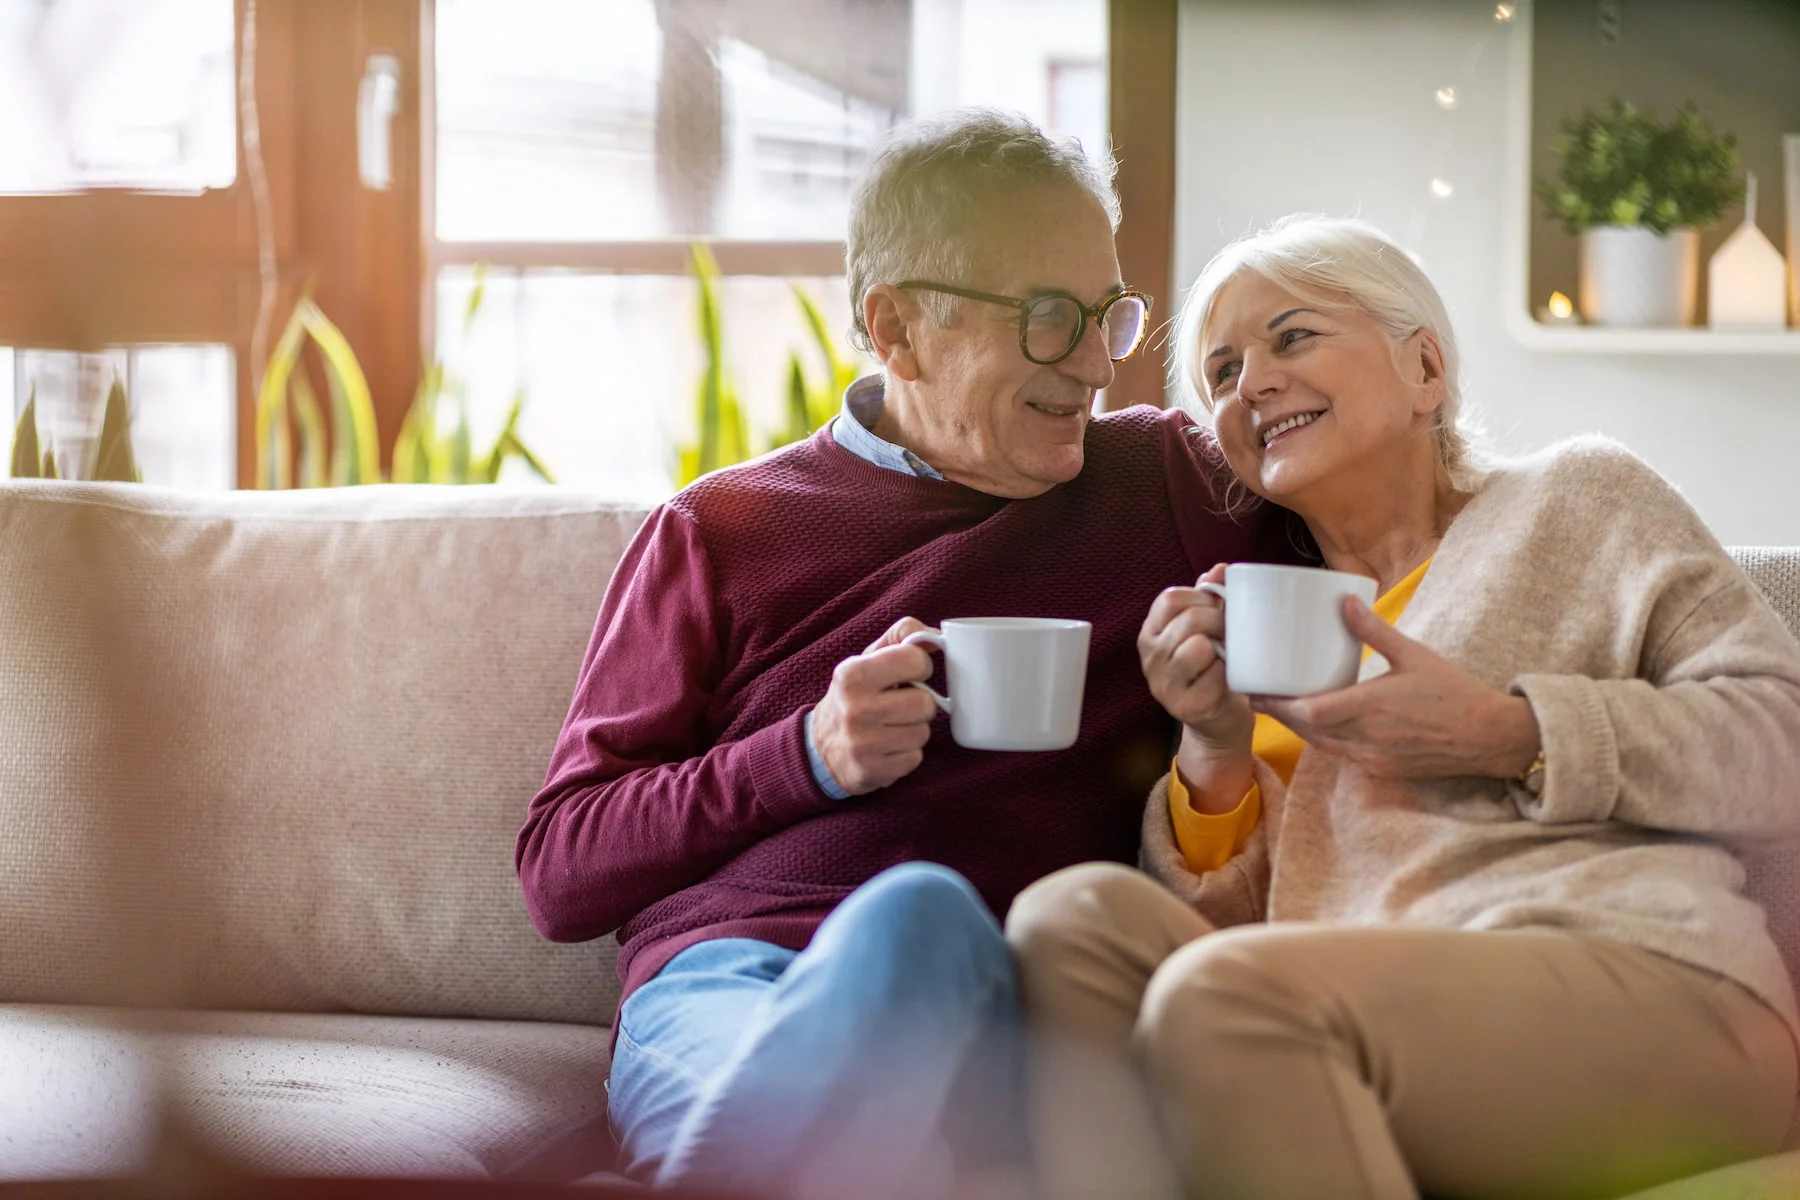 retirees sat on a sofa drinking from mugs